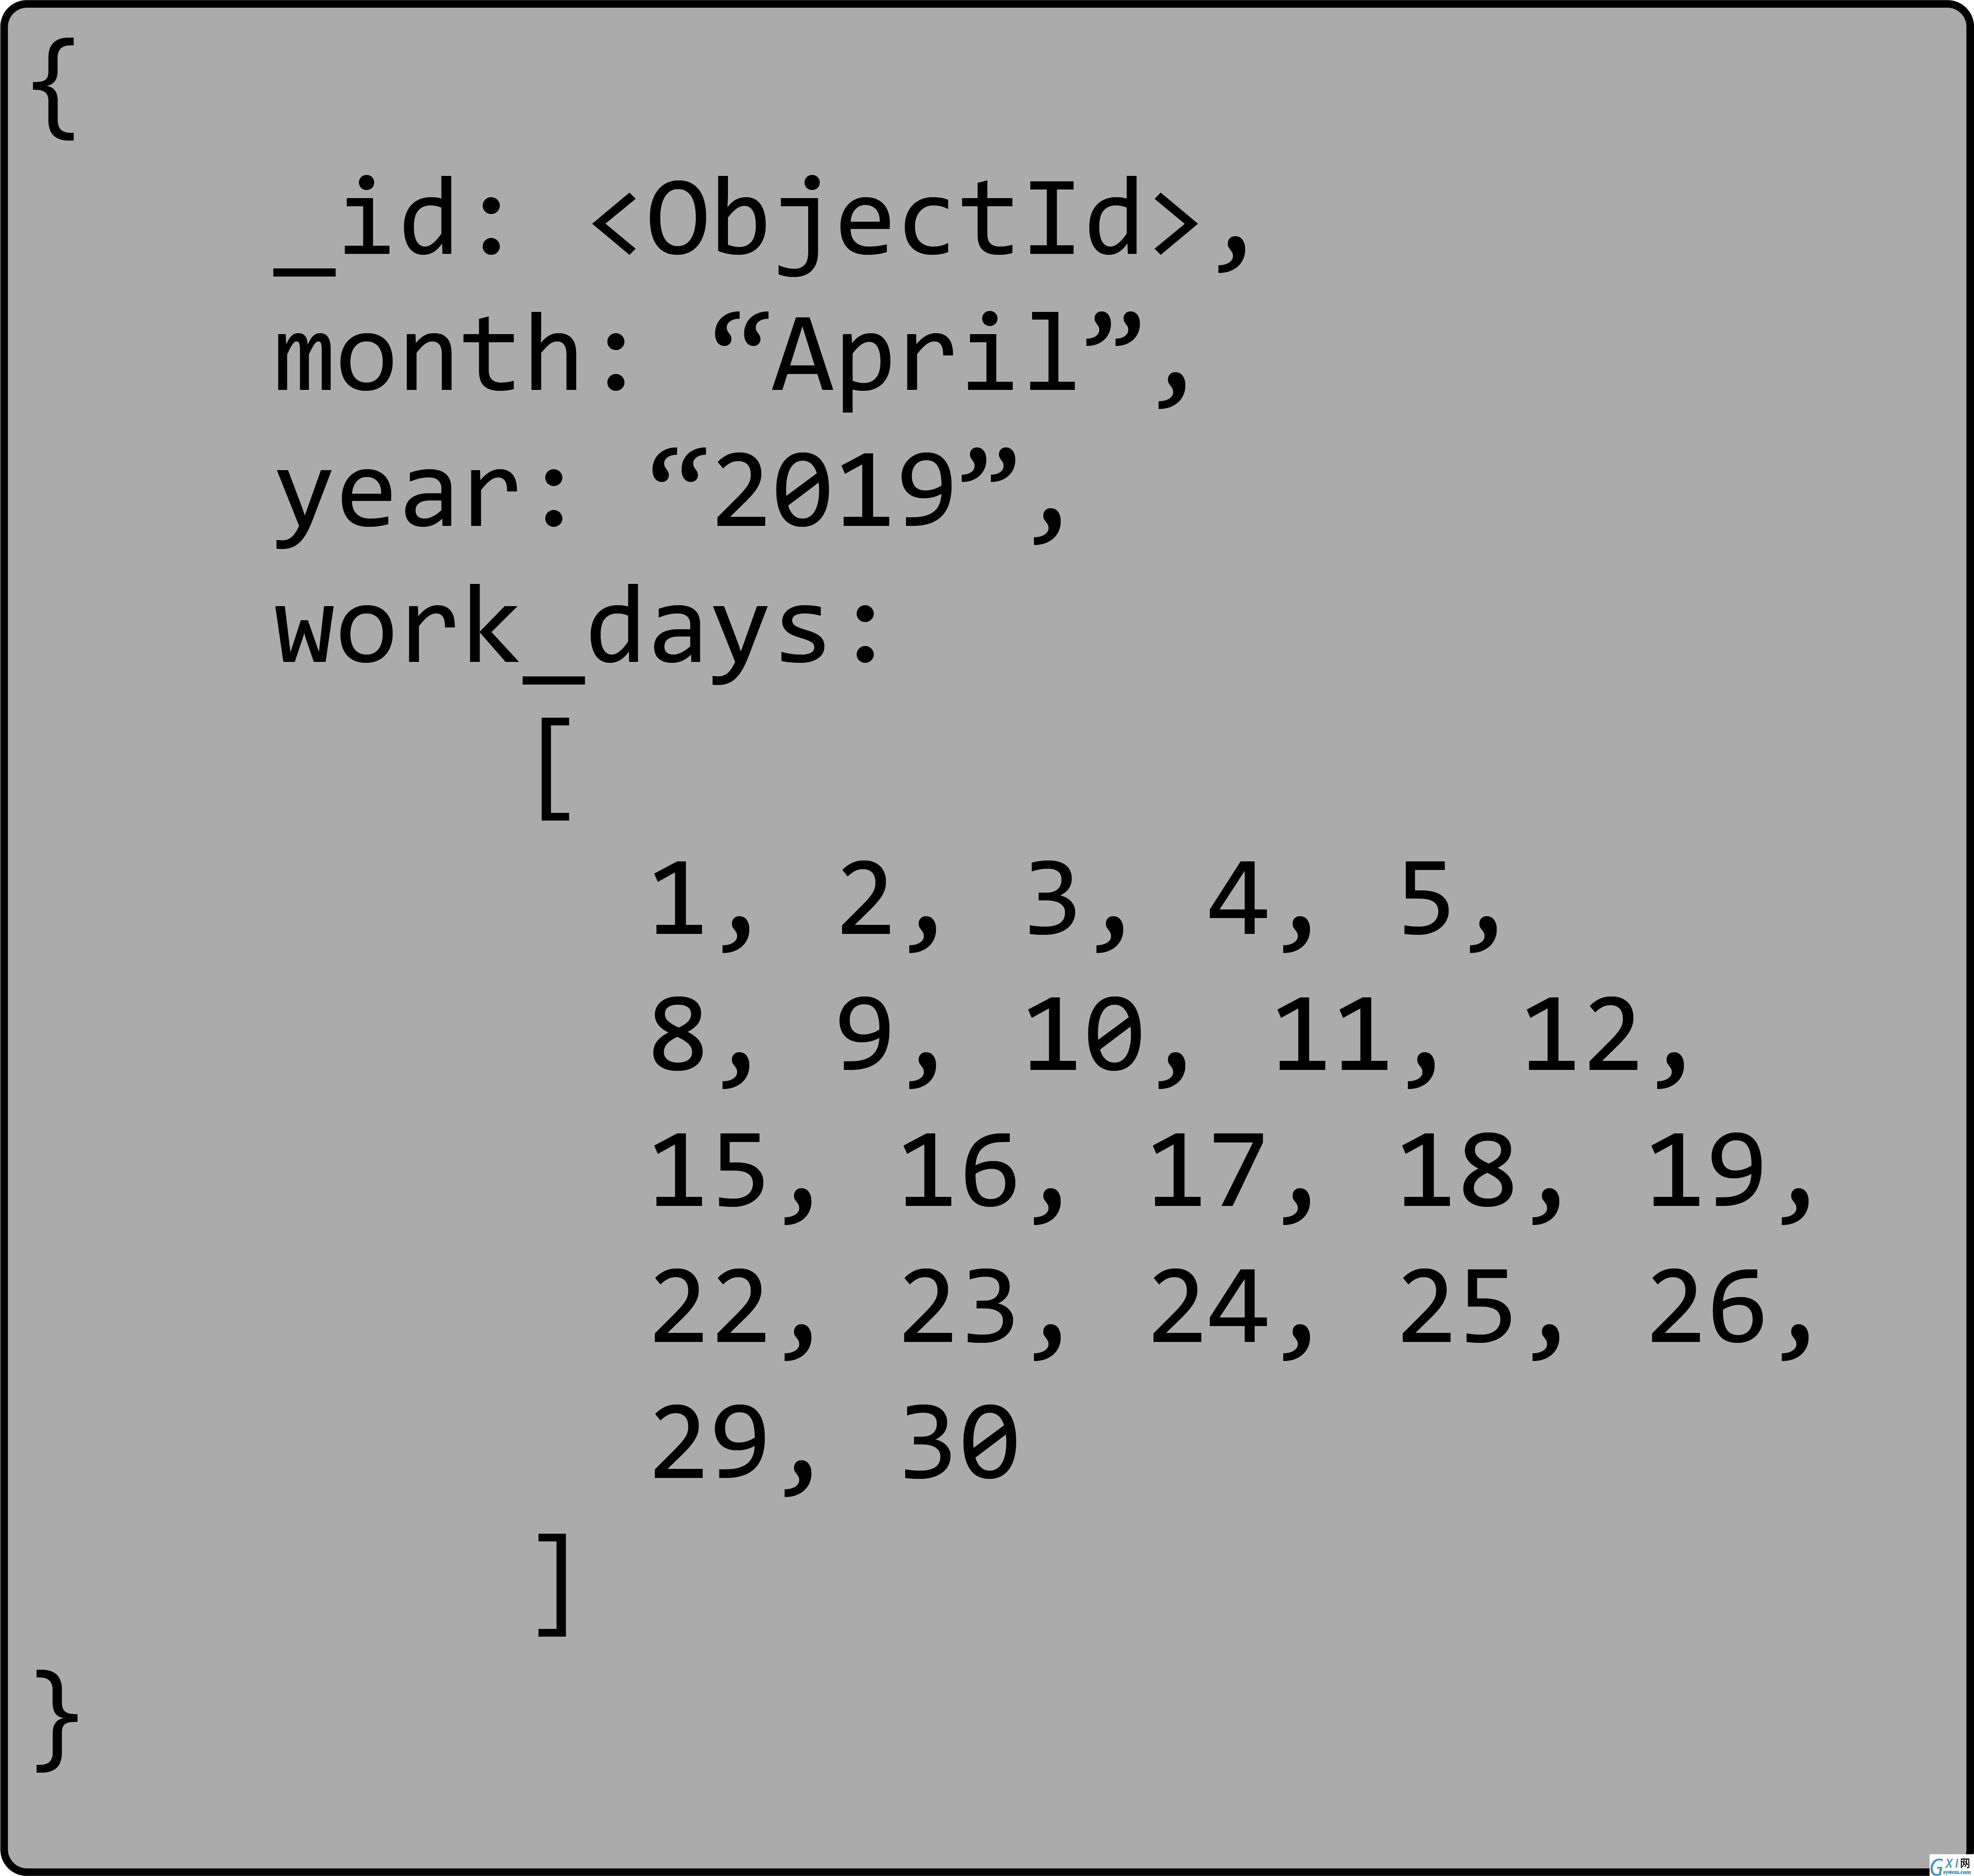 Image of the month of April 2019 with an array